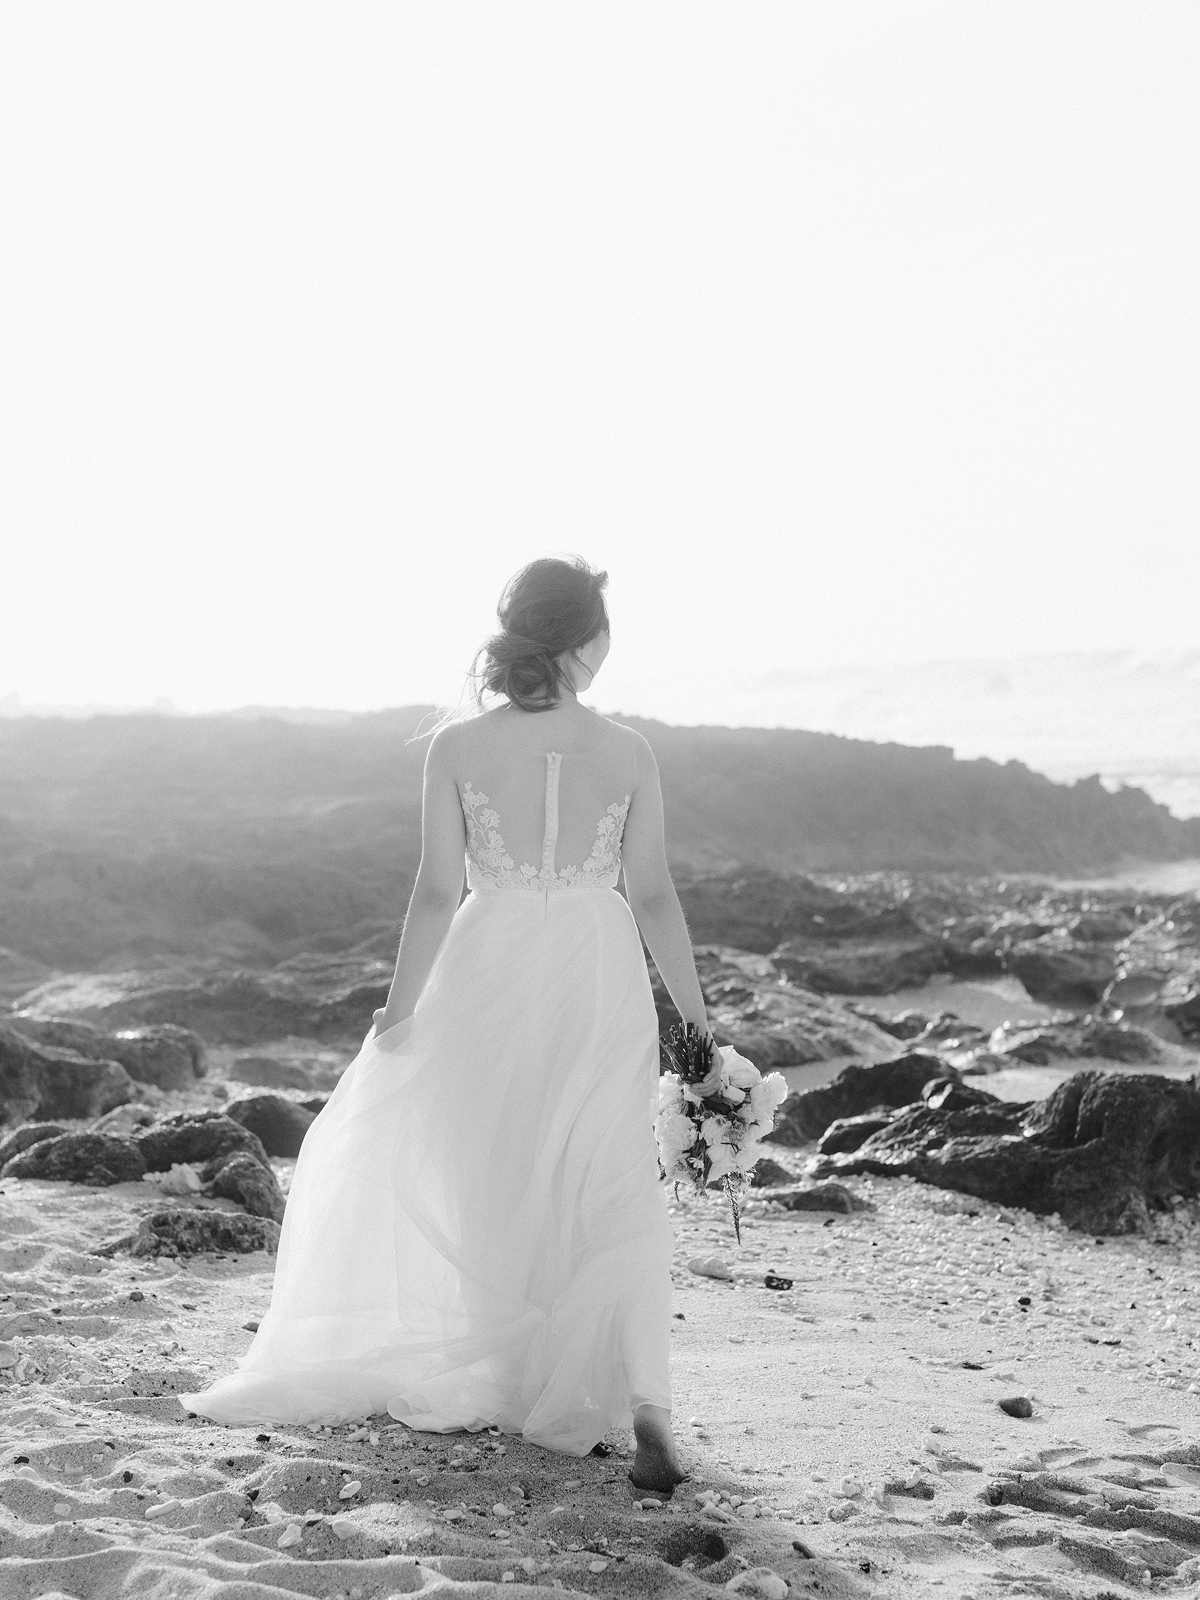 North Shore, Oahu elopement on film by Laura Ivanova Photography